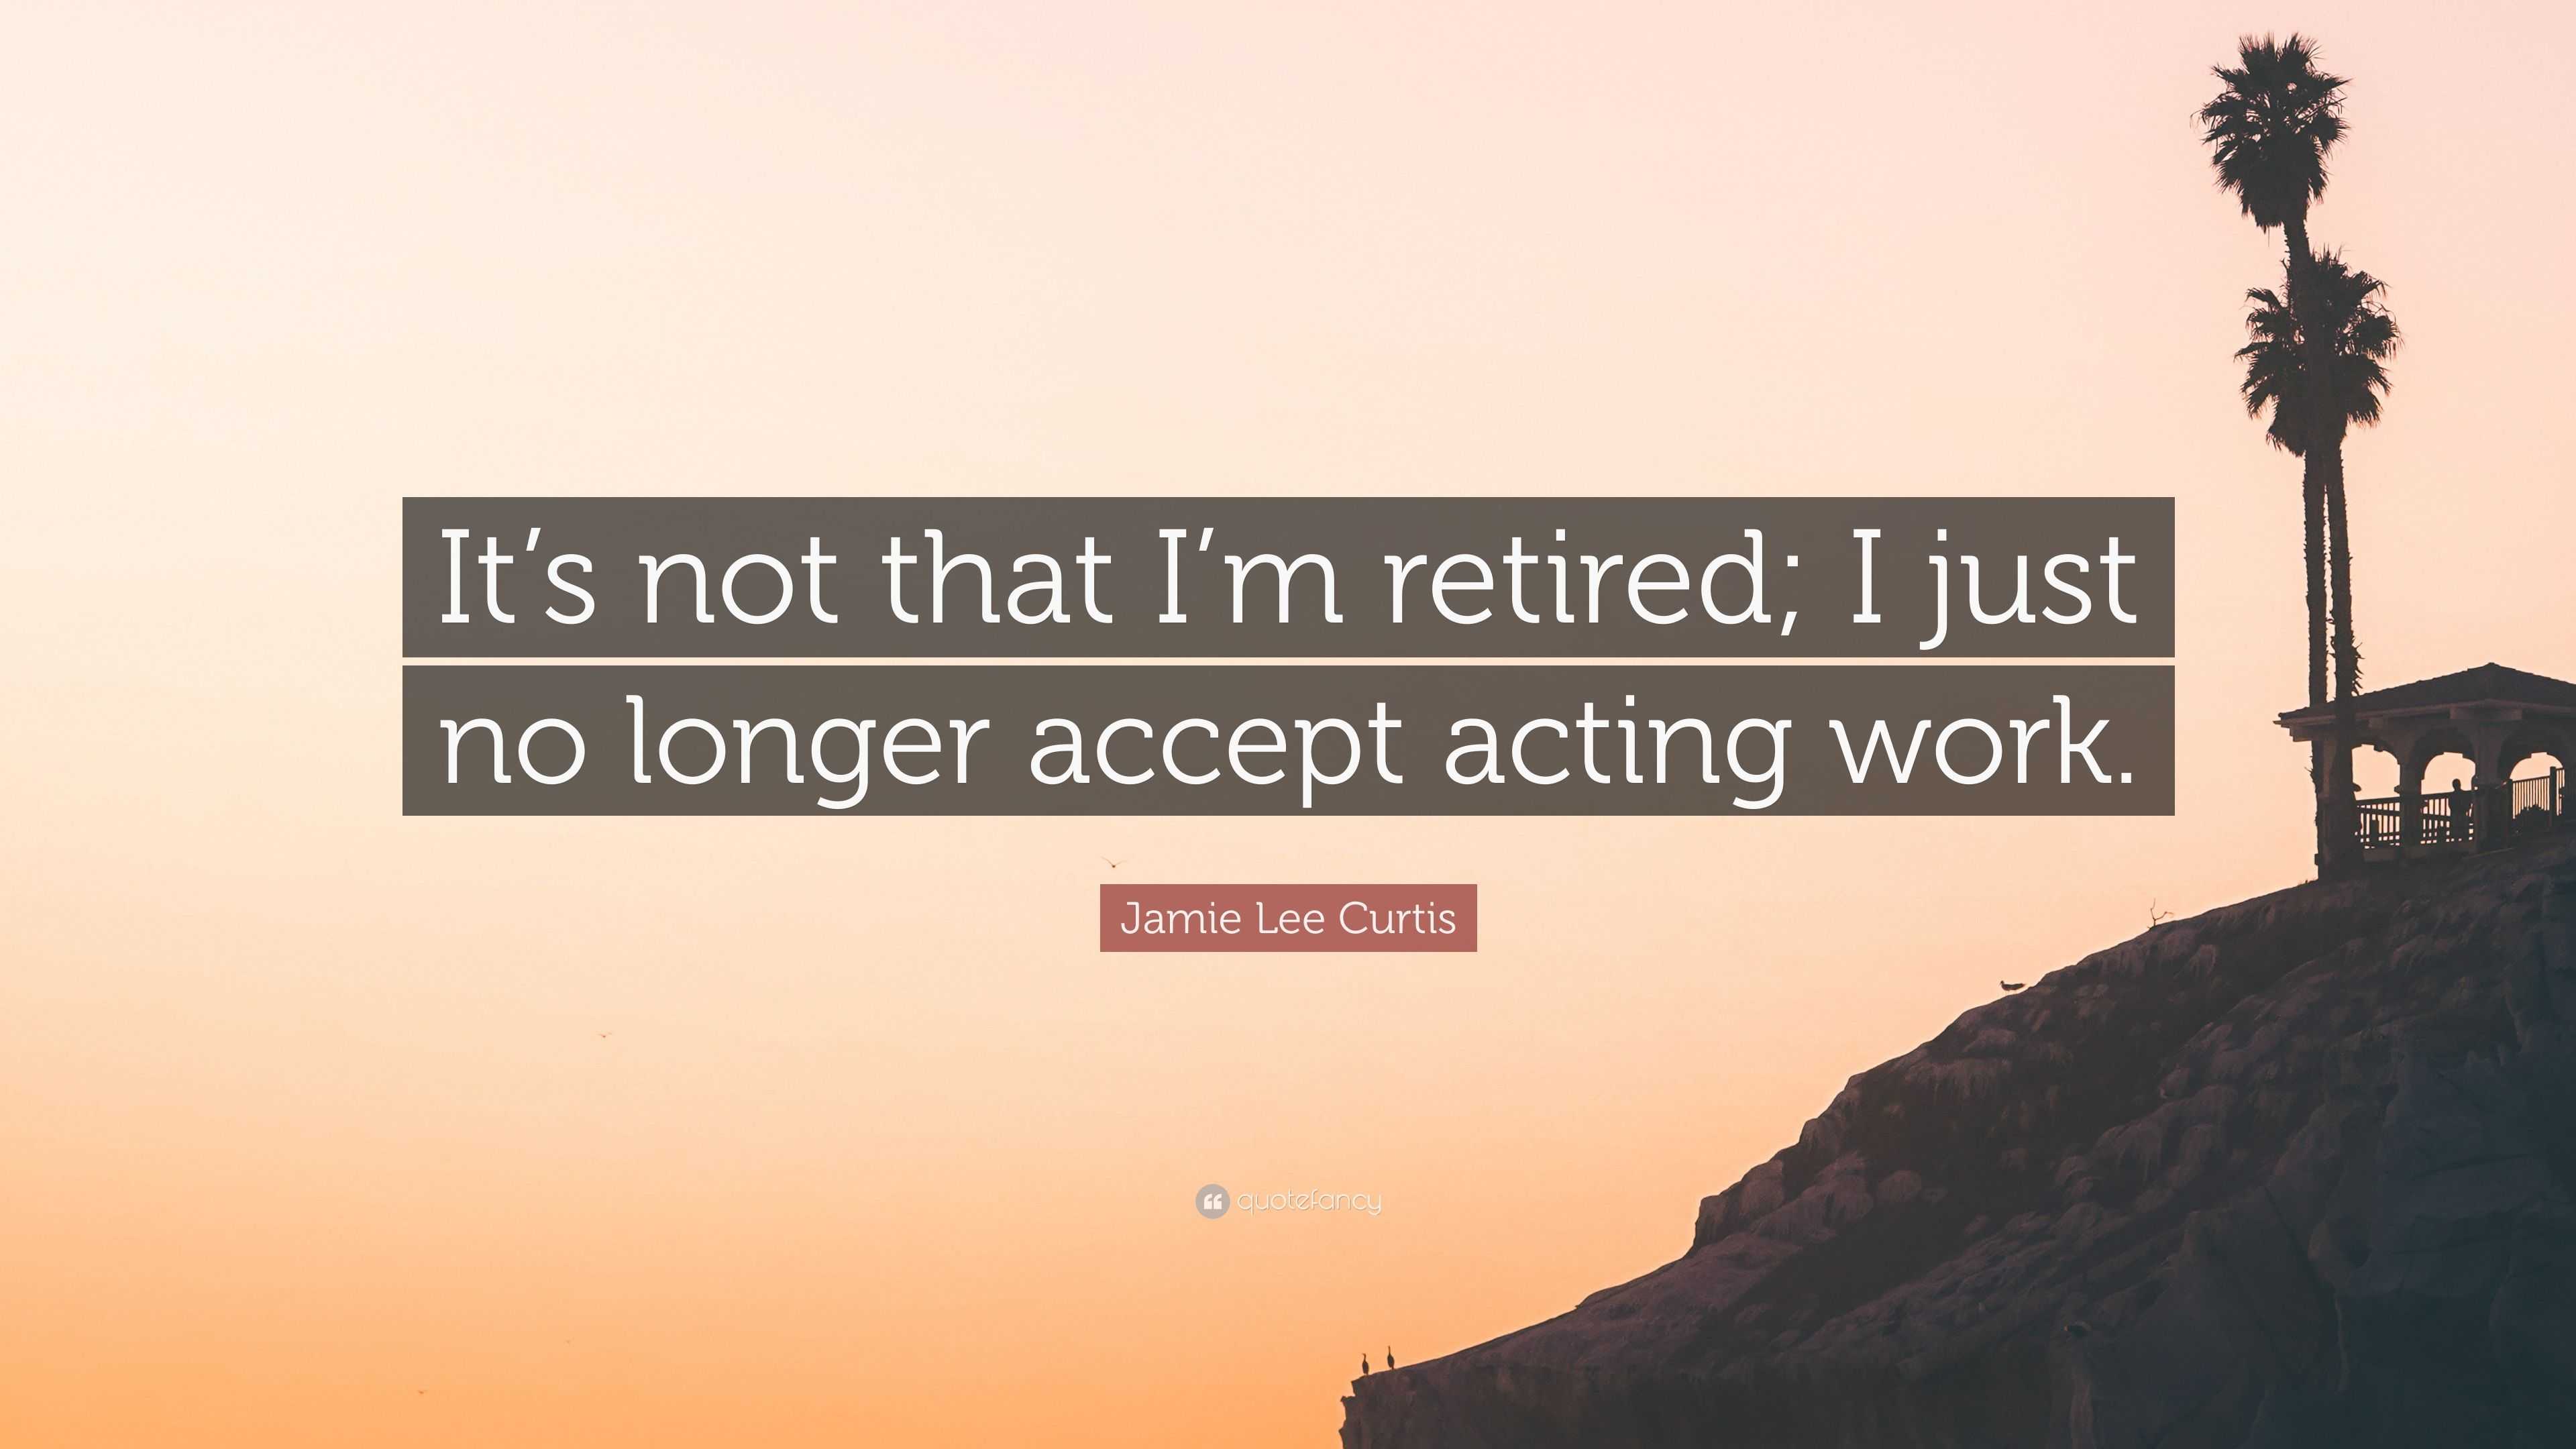 Jamie Lee Curtis Quote: “It's not that I'm retired; I just no longer accept  acting